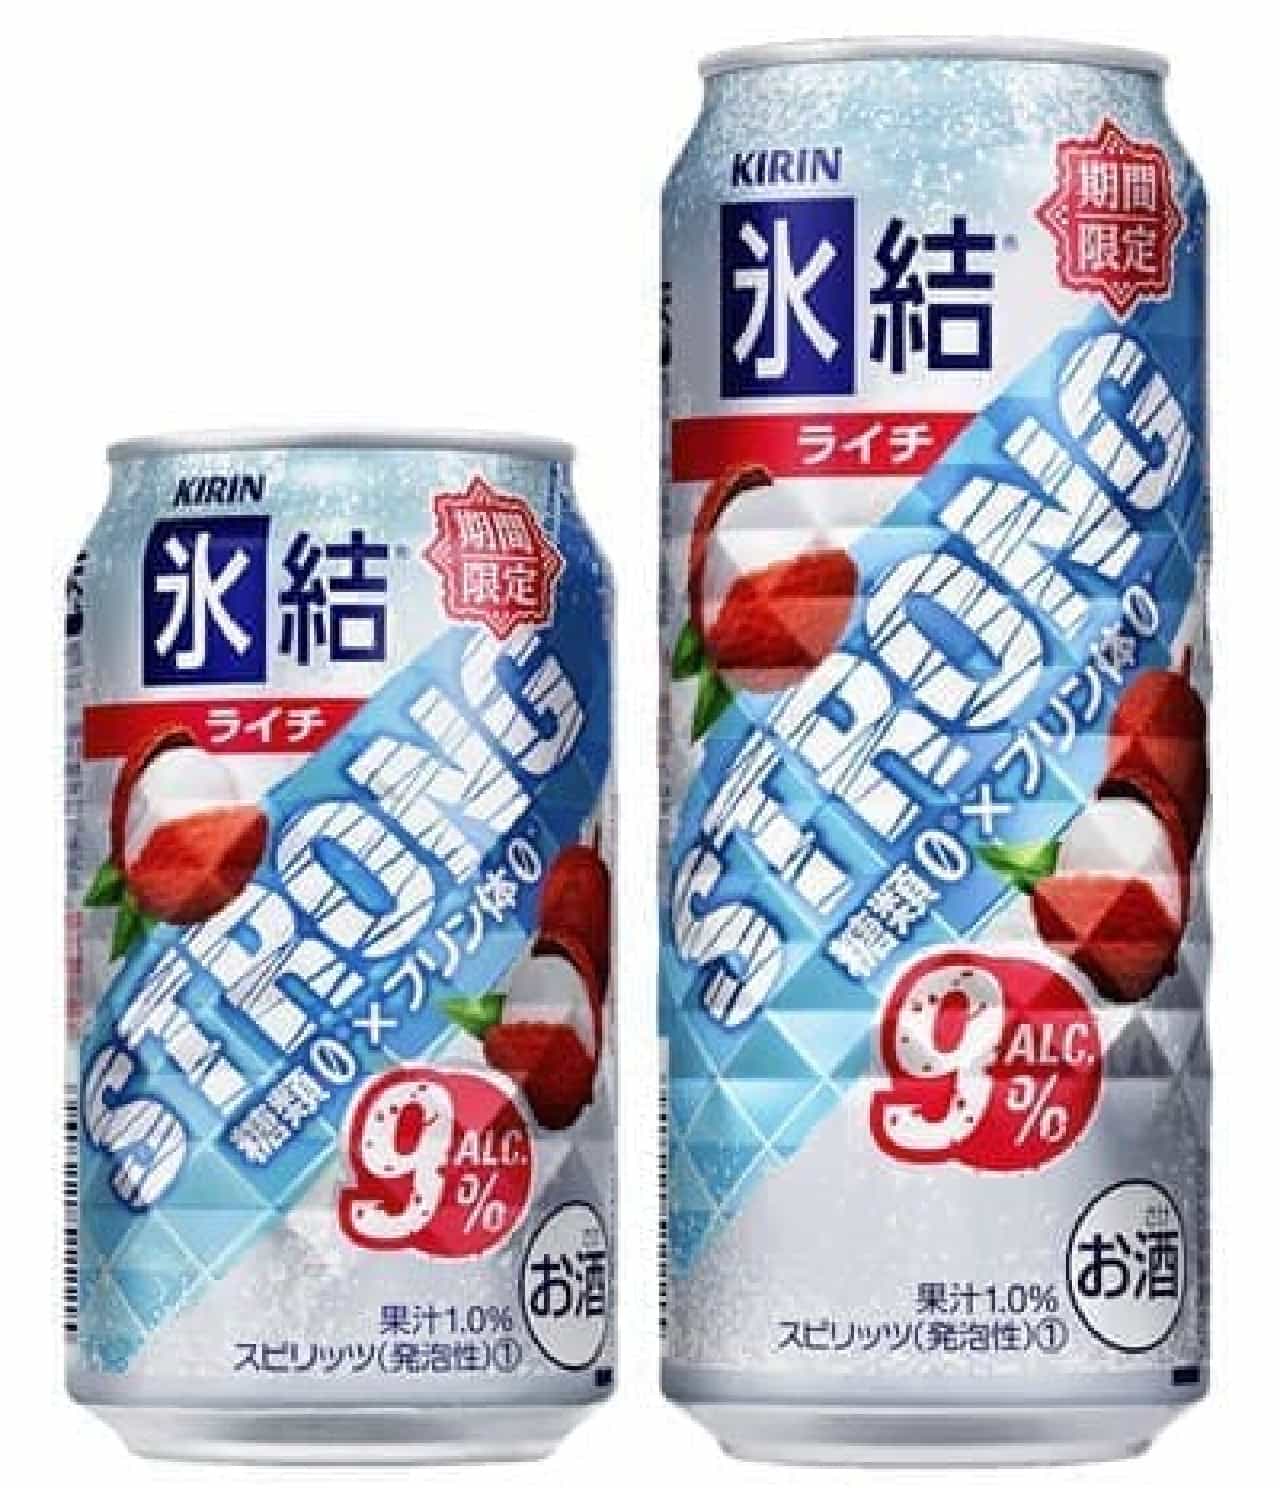 "Freezing strong lychee"